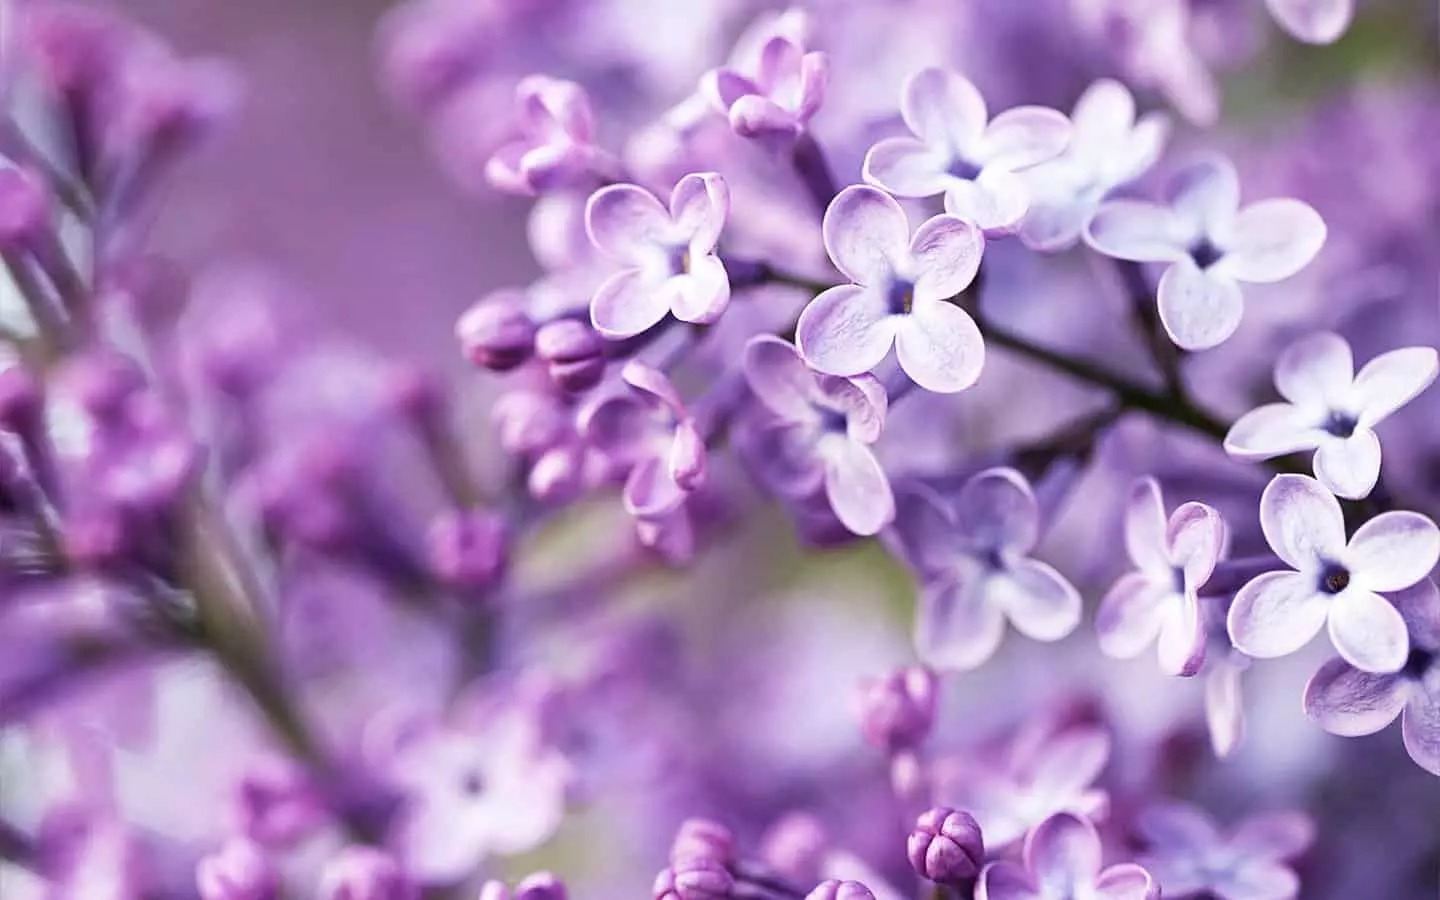 Lilac color impressive with its beauty